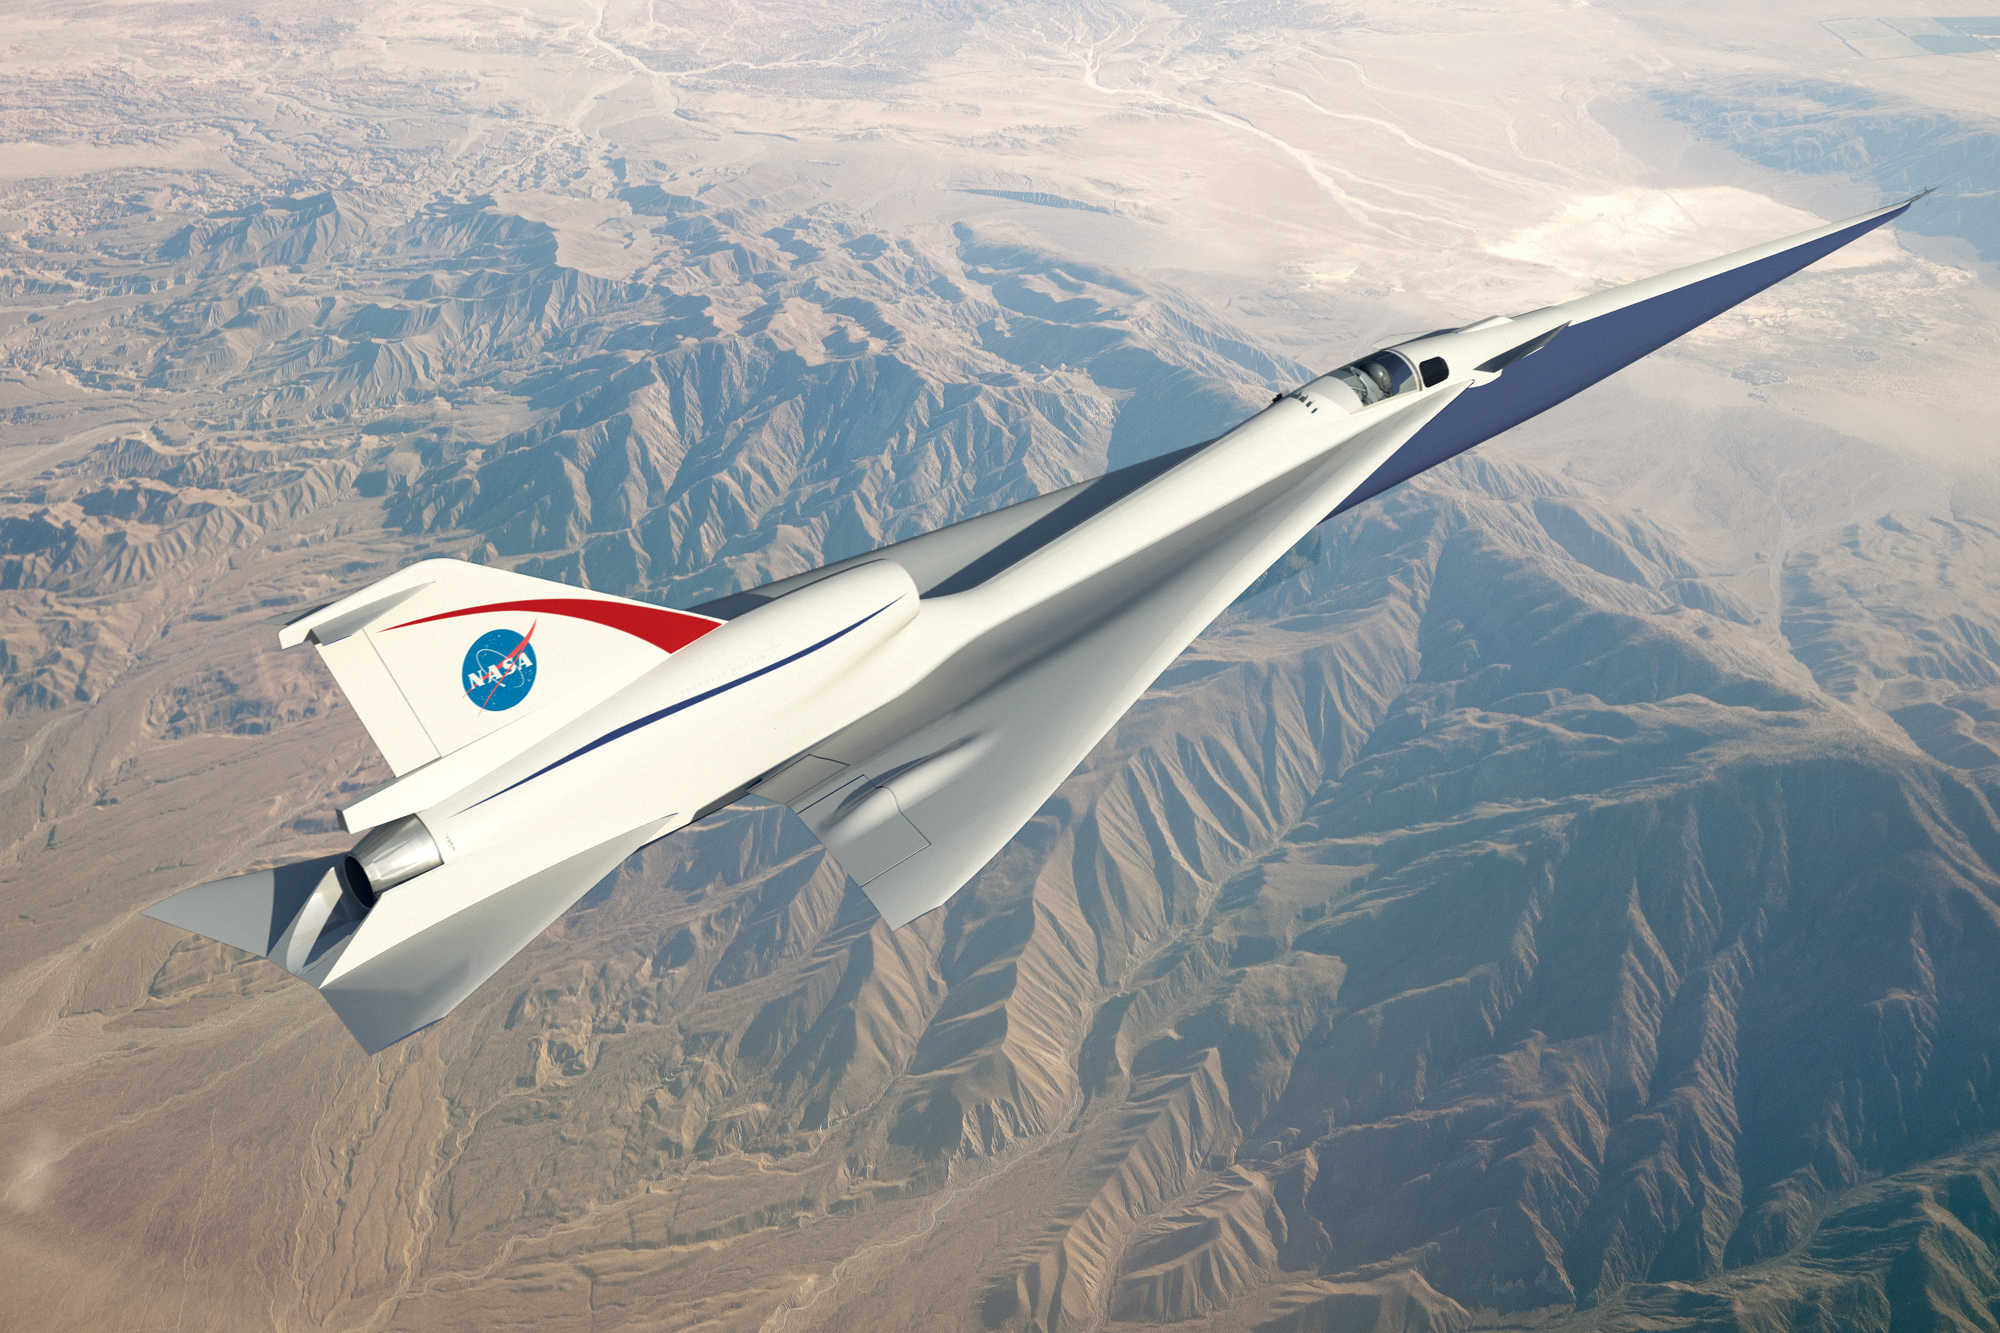 The Quiet Supersonic Technology preliminary design concept, an artist rendering, in flight.